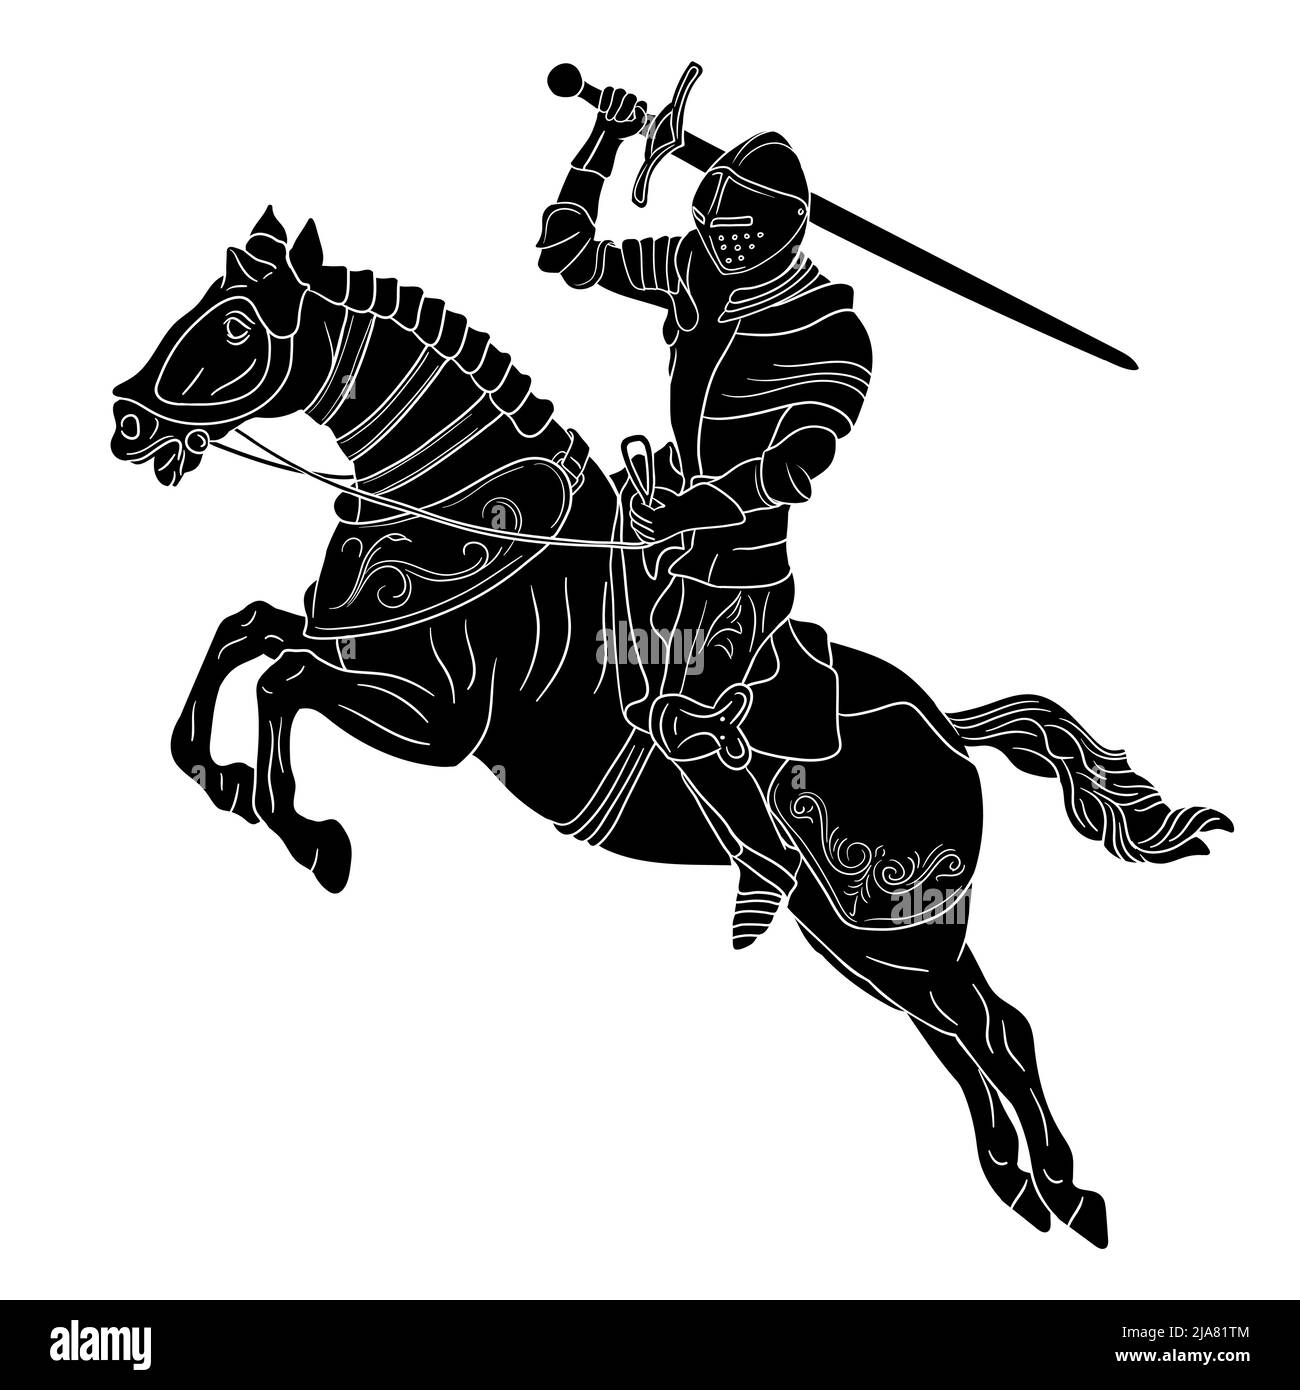 A knight in medieval armor on horseback with a sword in his hands prepares to strike. Figure isolated on white background. Stock Vector